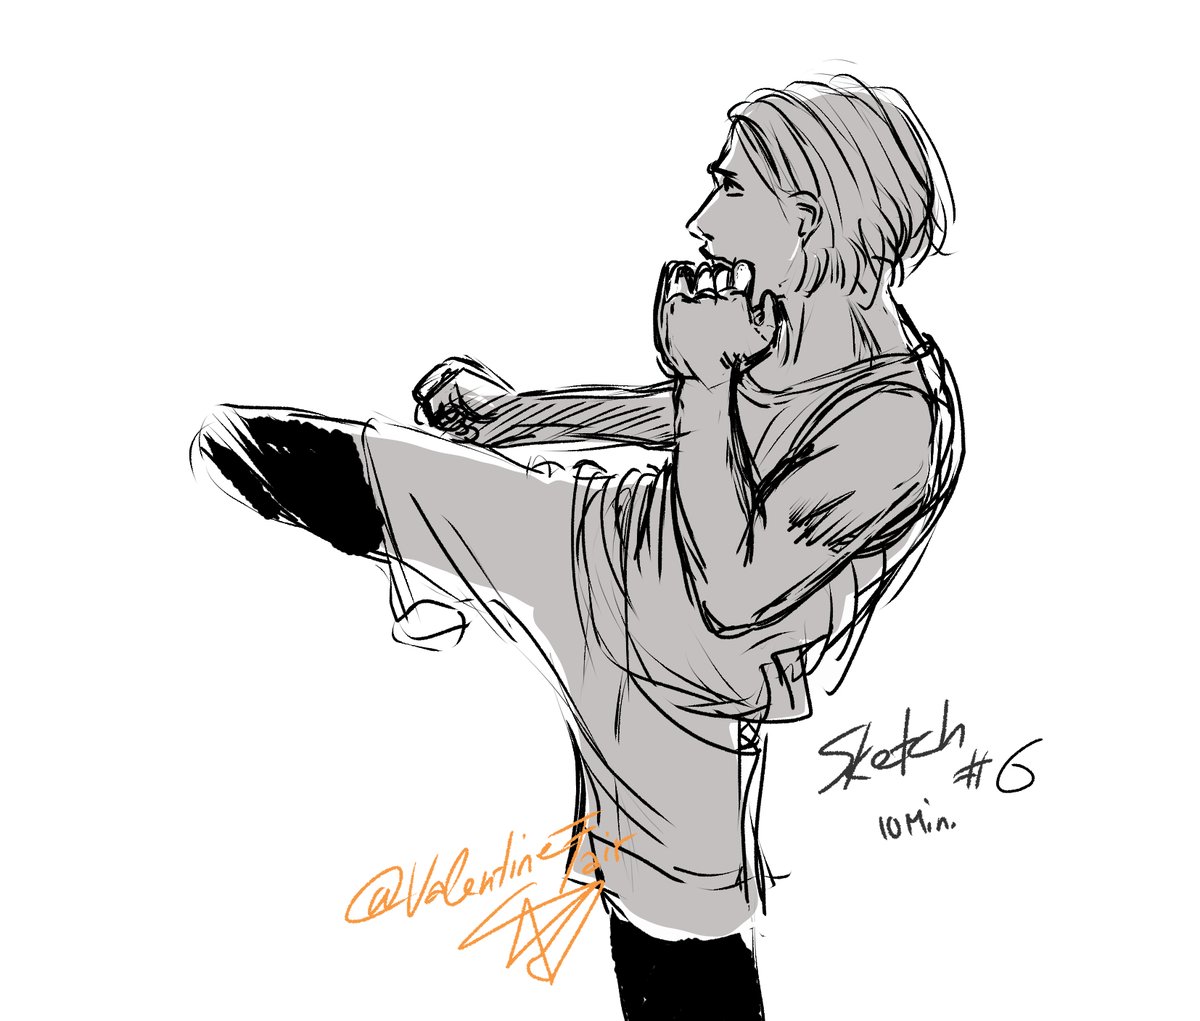 This was fun!! Though I'd liked a few more minutes to work on the arm and hands 🙈 (Added the shadow after 10 minutes.) #CobraKai #CobraKaiFanart #QuickSketch #Studies #RobbyKeene